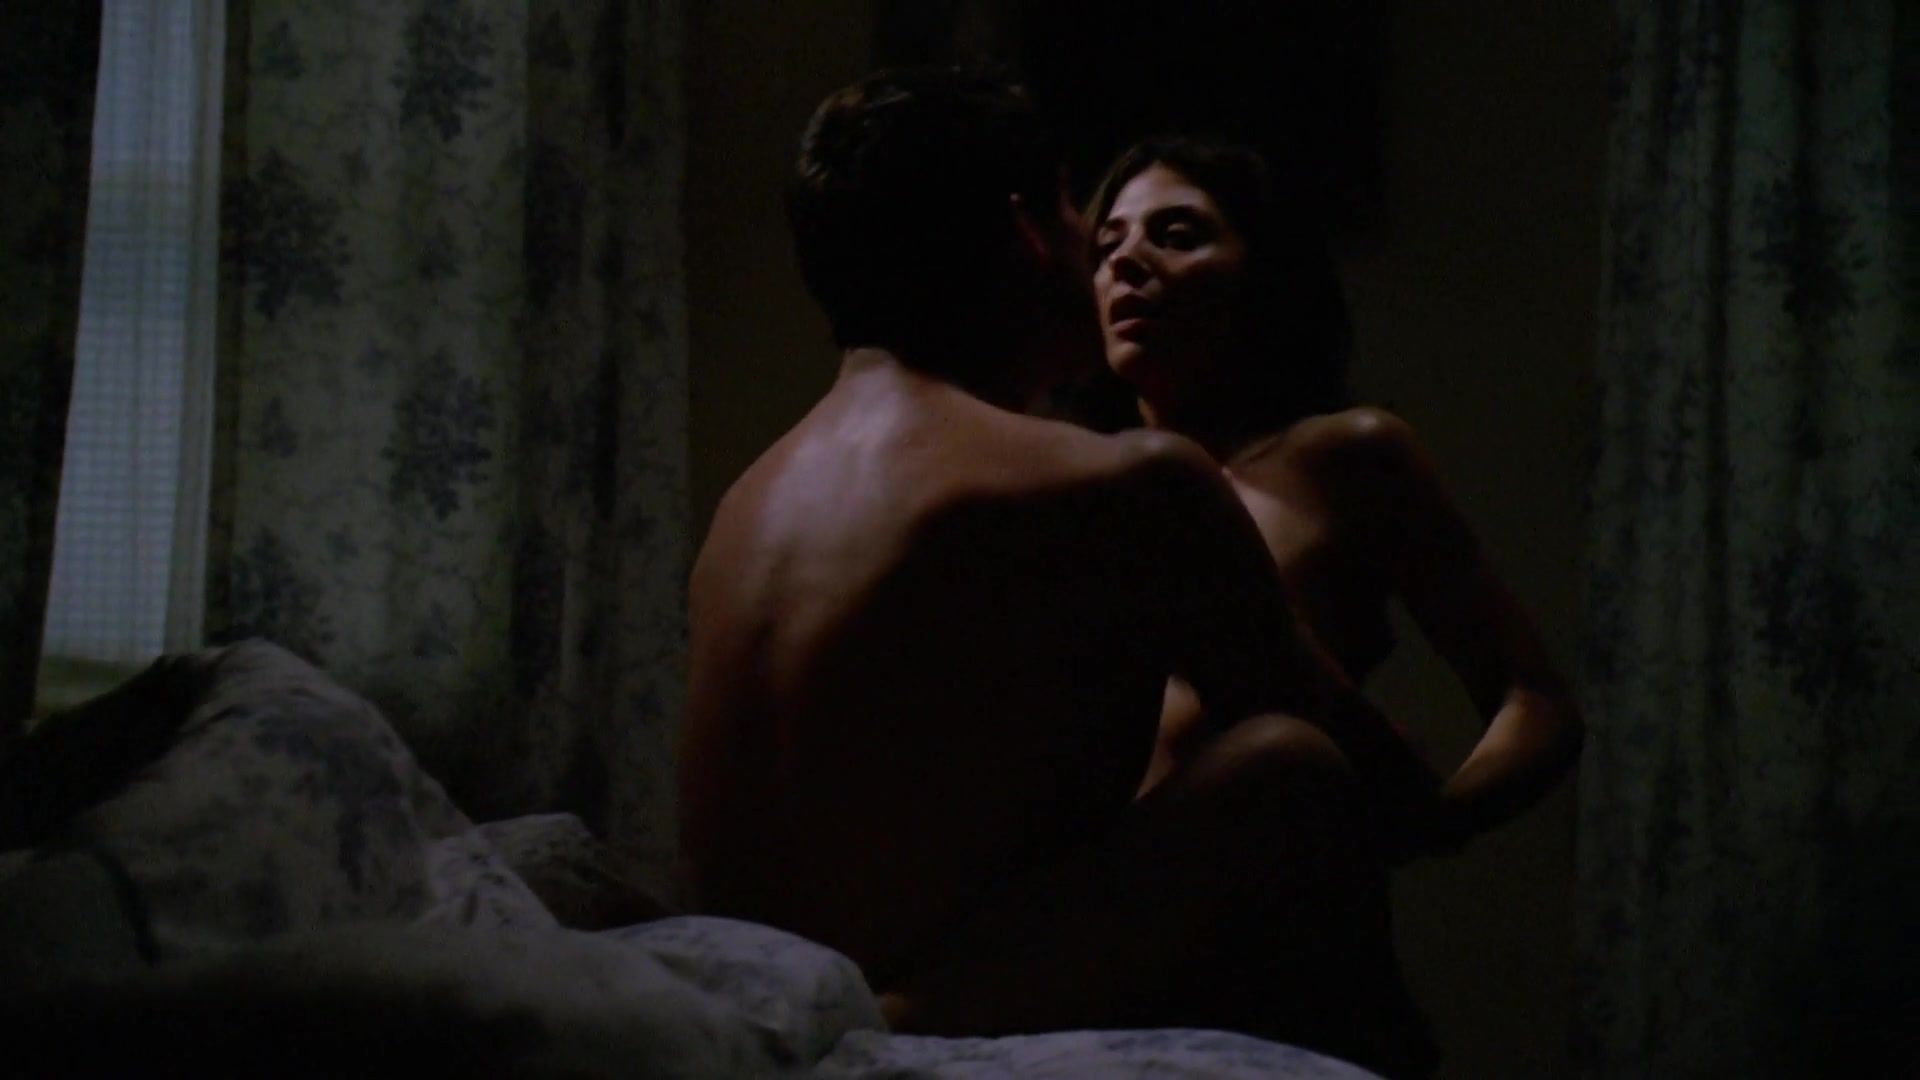 Hot Whores Sexy Callie Thorne naked -The Wire s02e06 (2003) Adulter.Club - 2